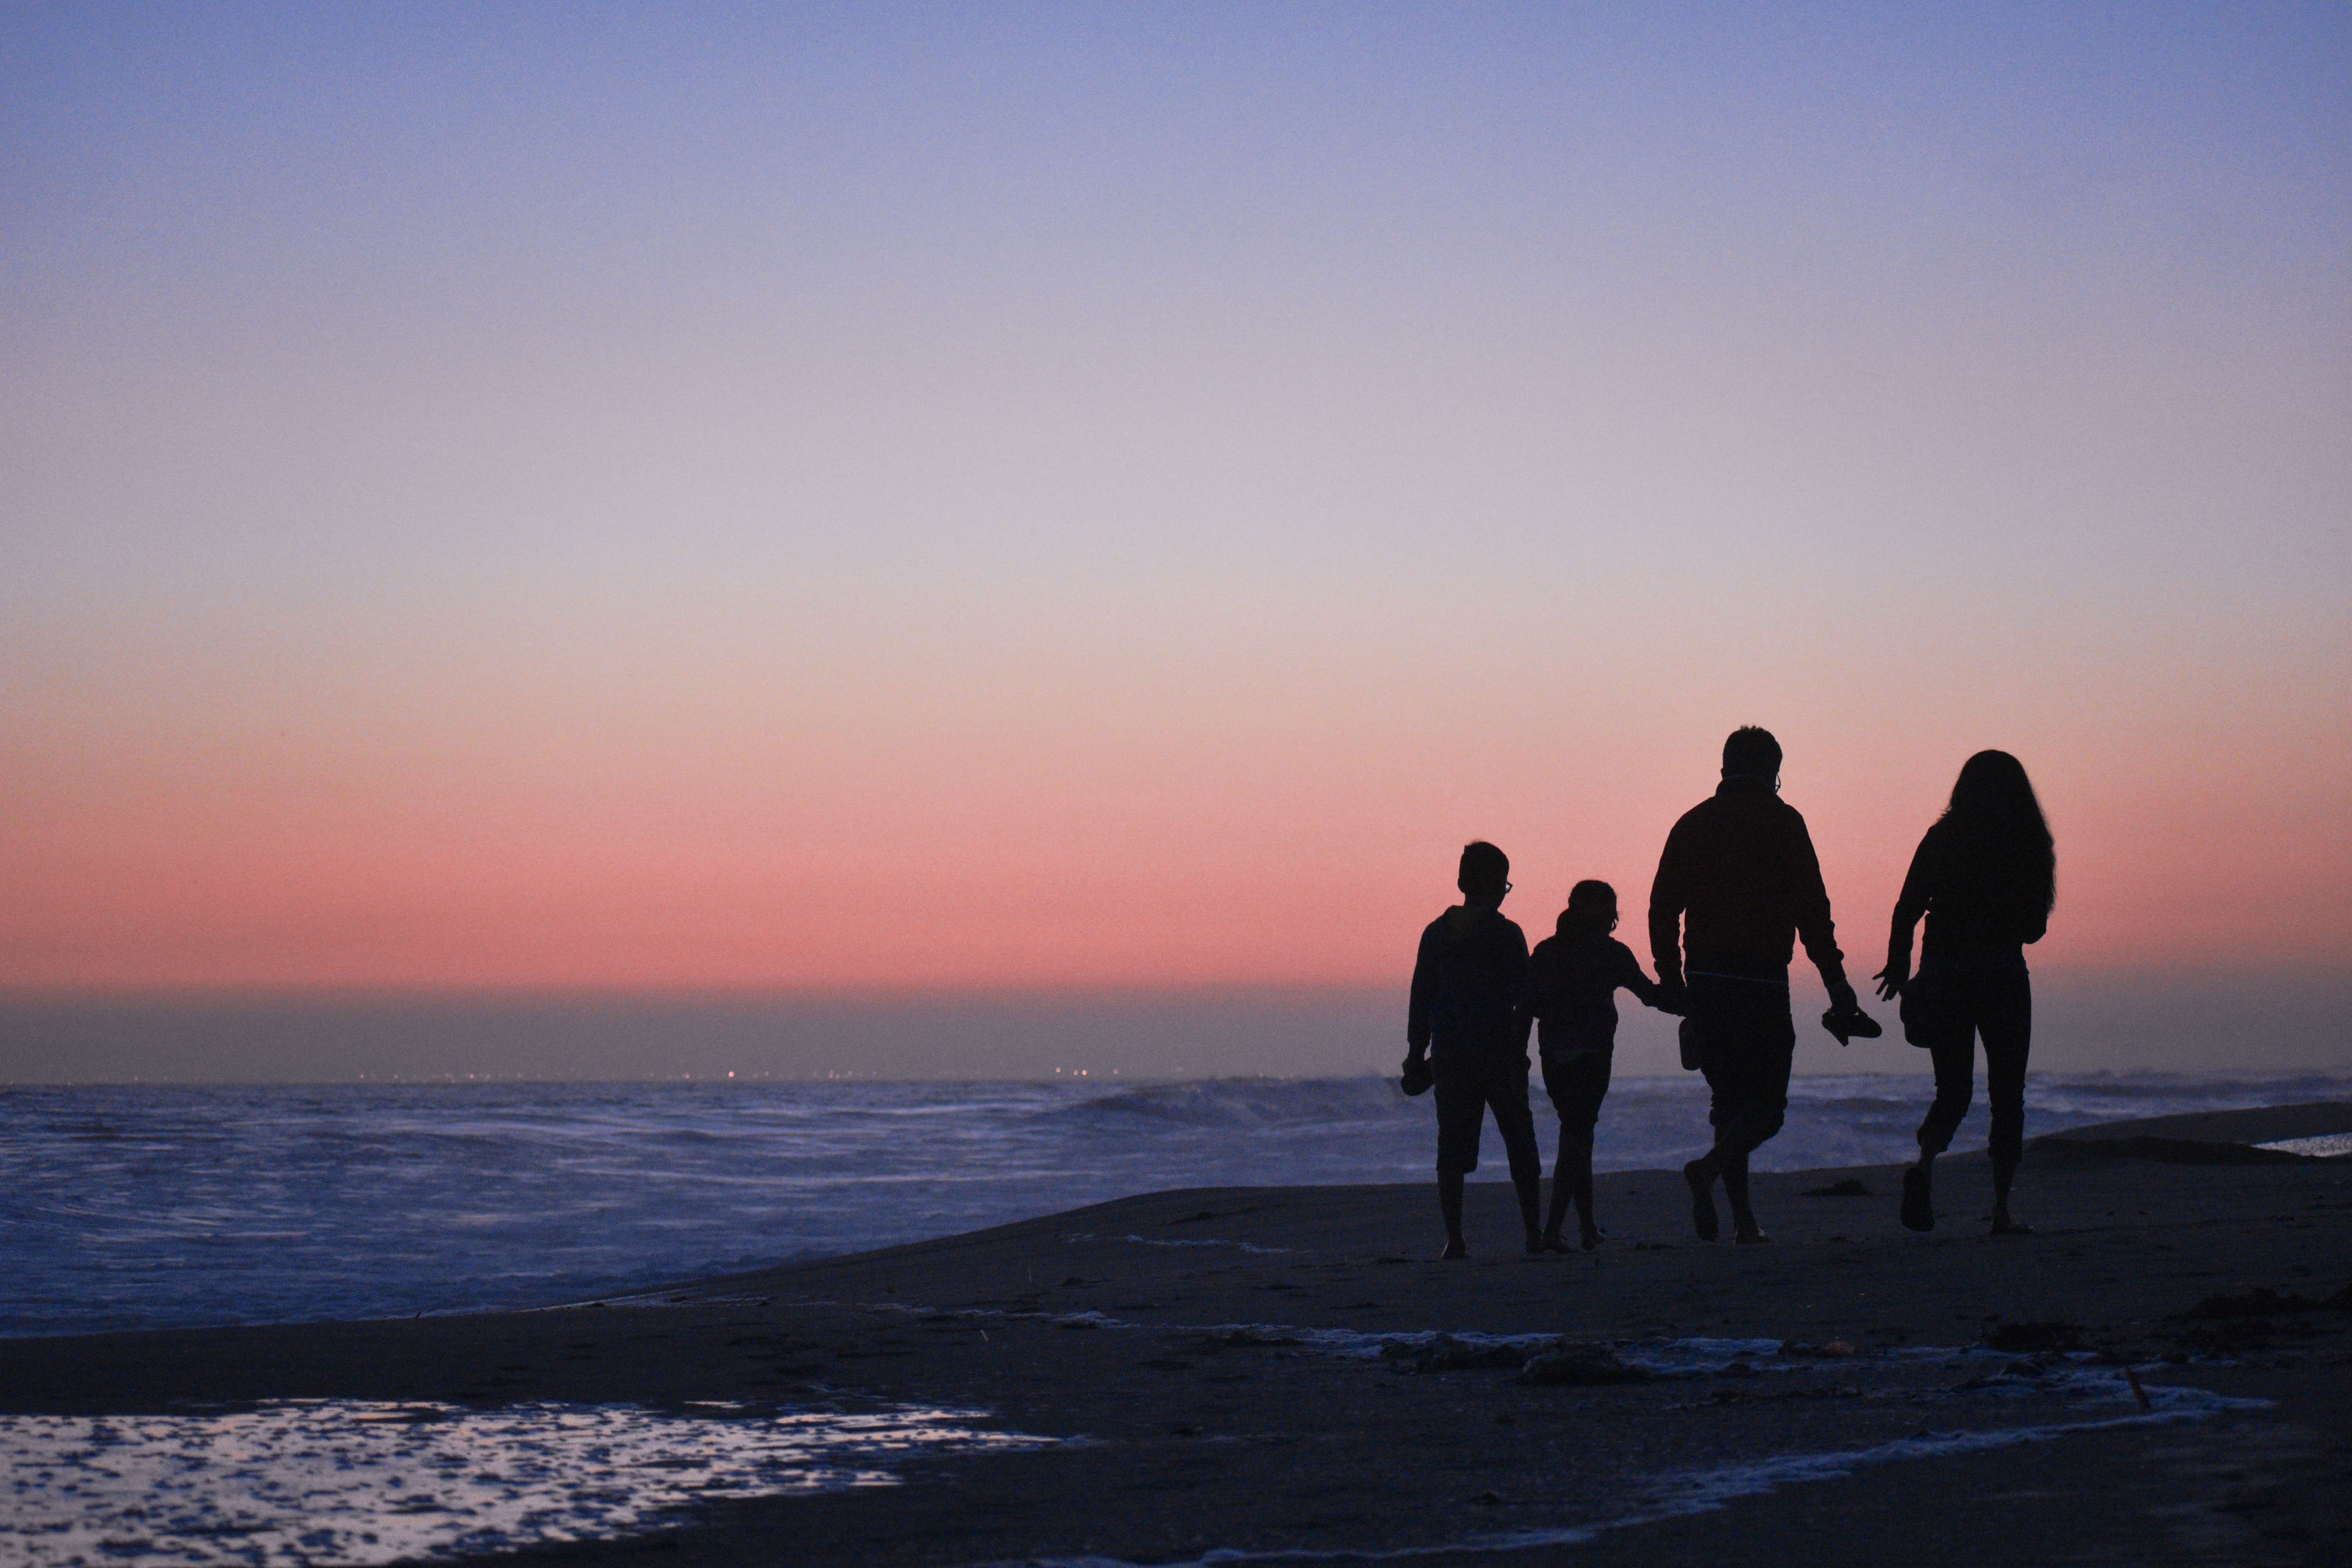 The silhouette of a family walking on the beach while the sun is set.